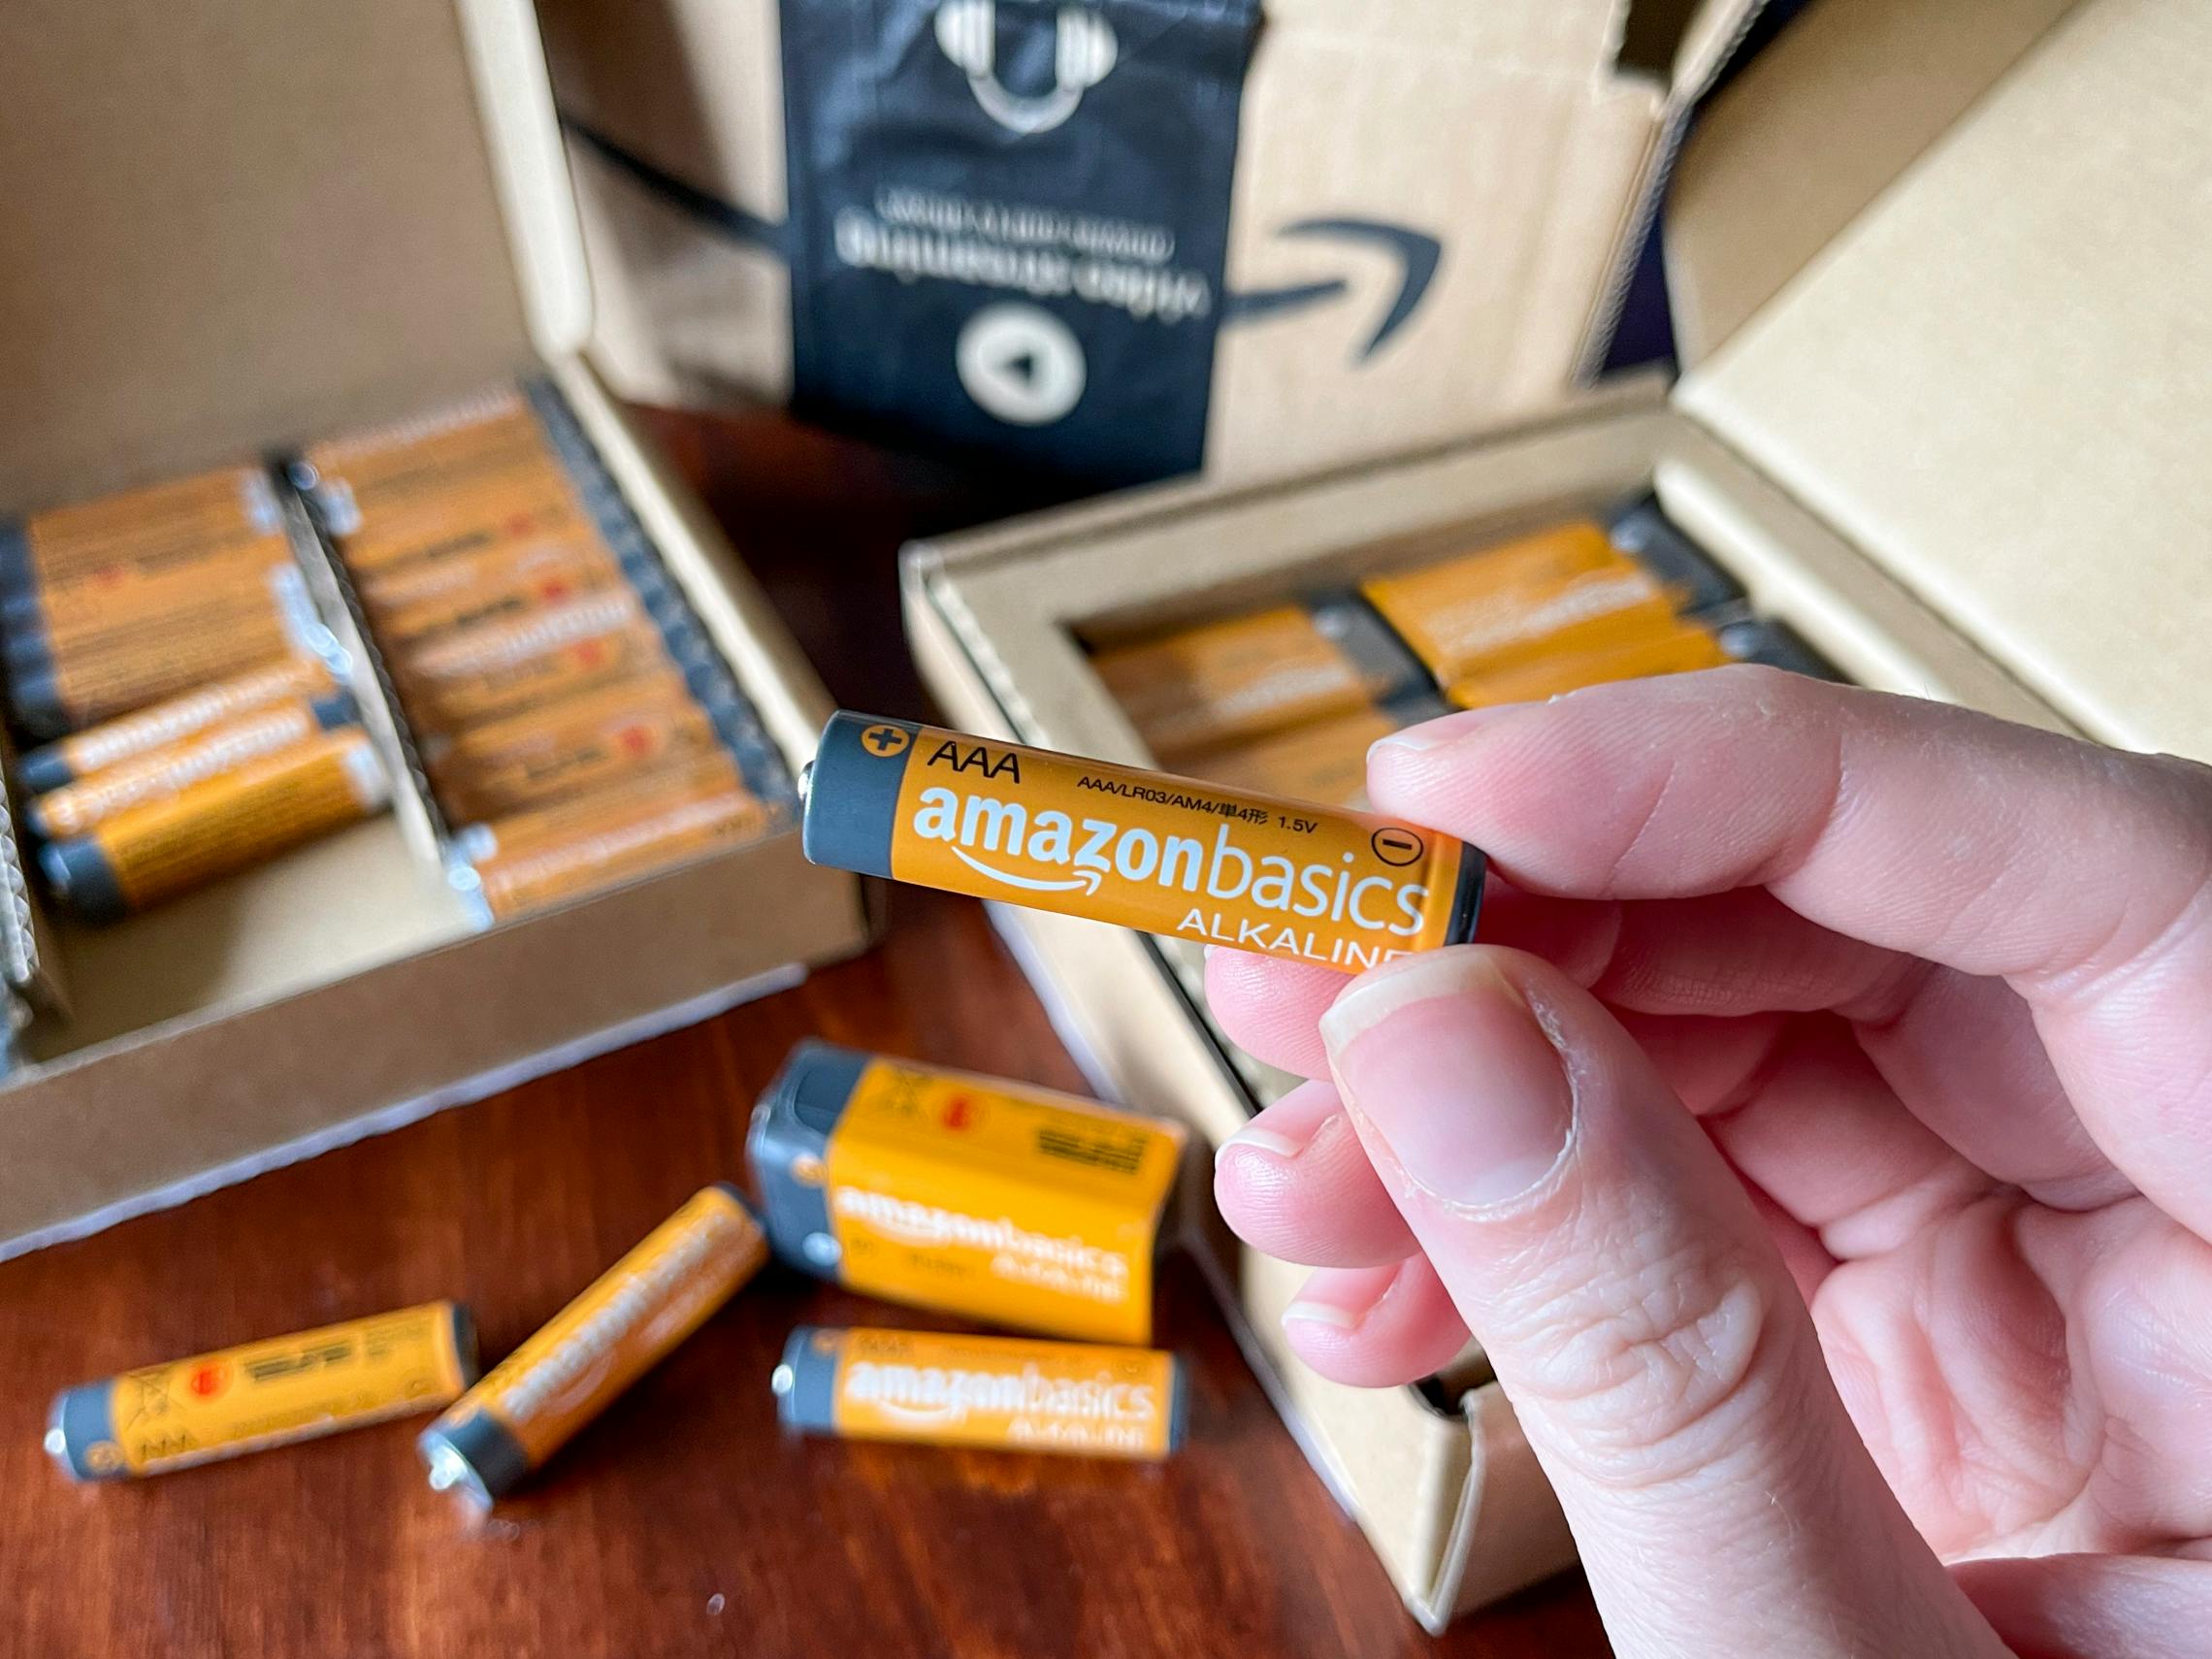 A person holding up an orange amazon basics battery with an open box of batteries in the background.